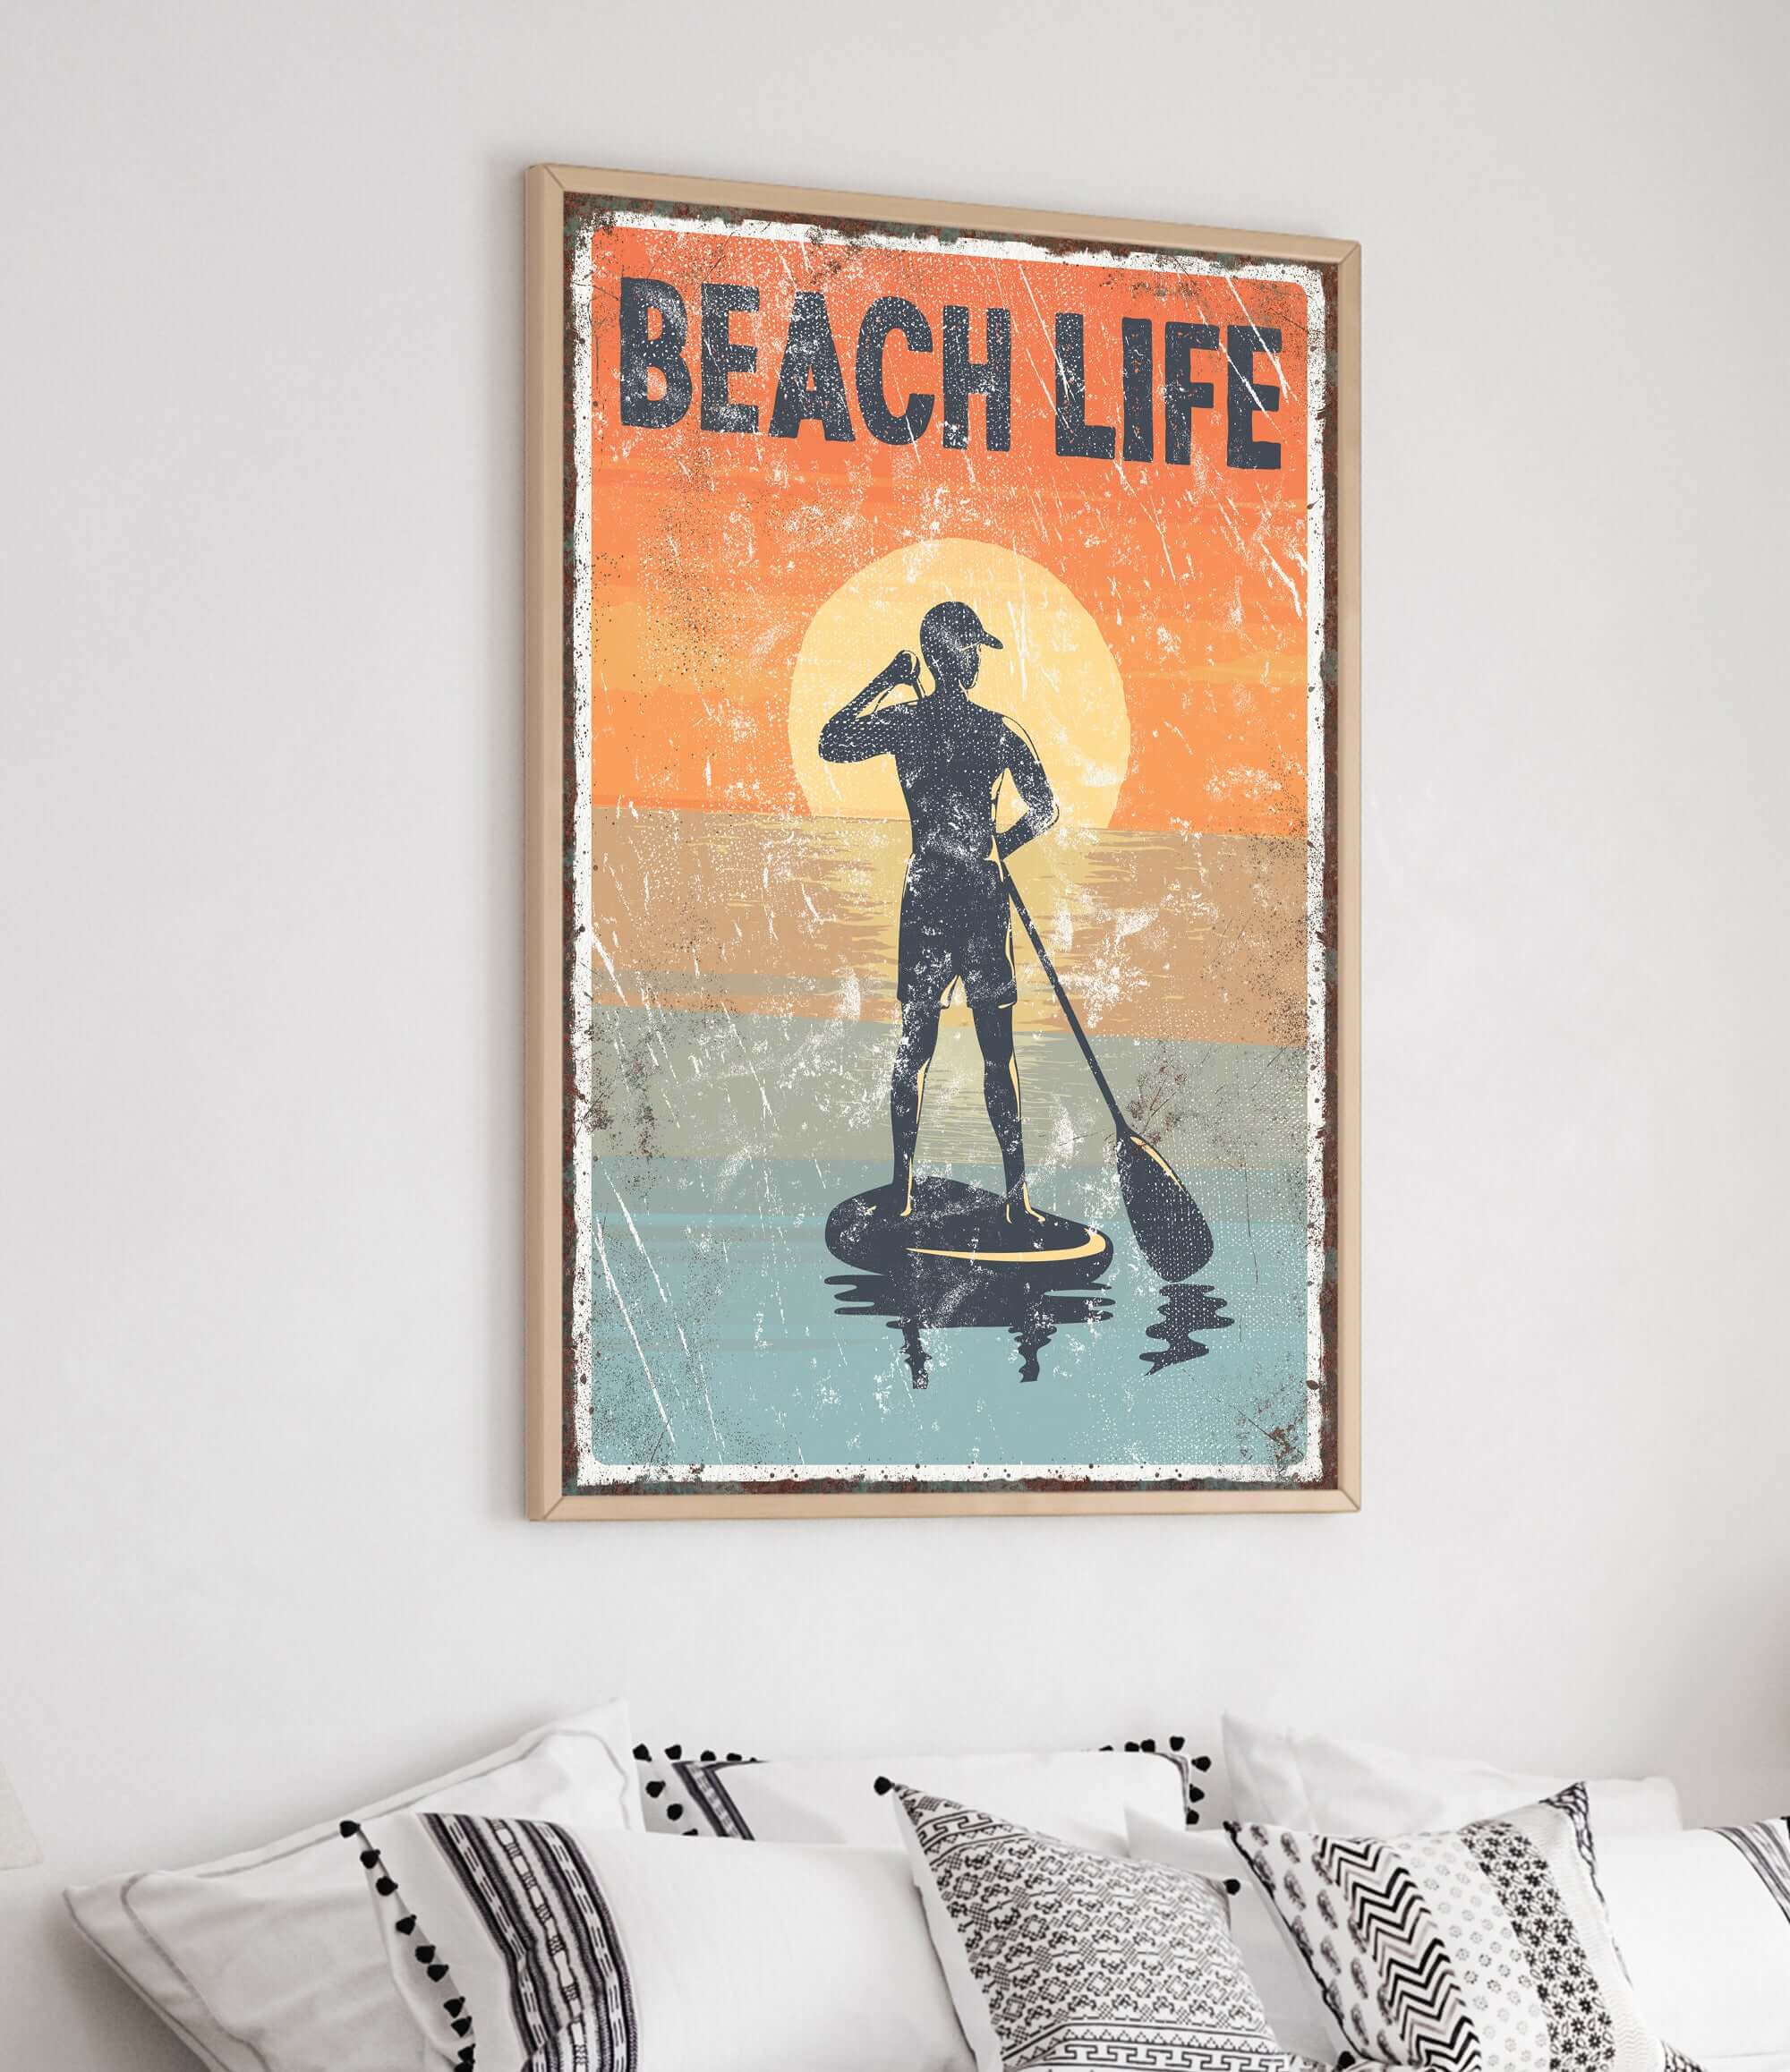 a picture of a man on a surfboard in a bedroom